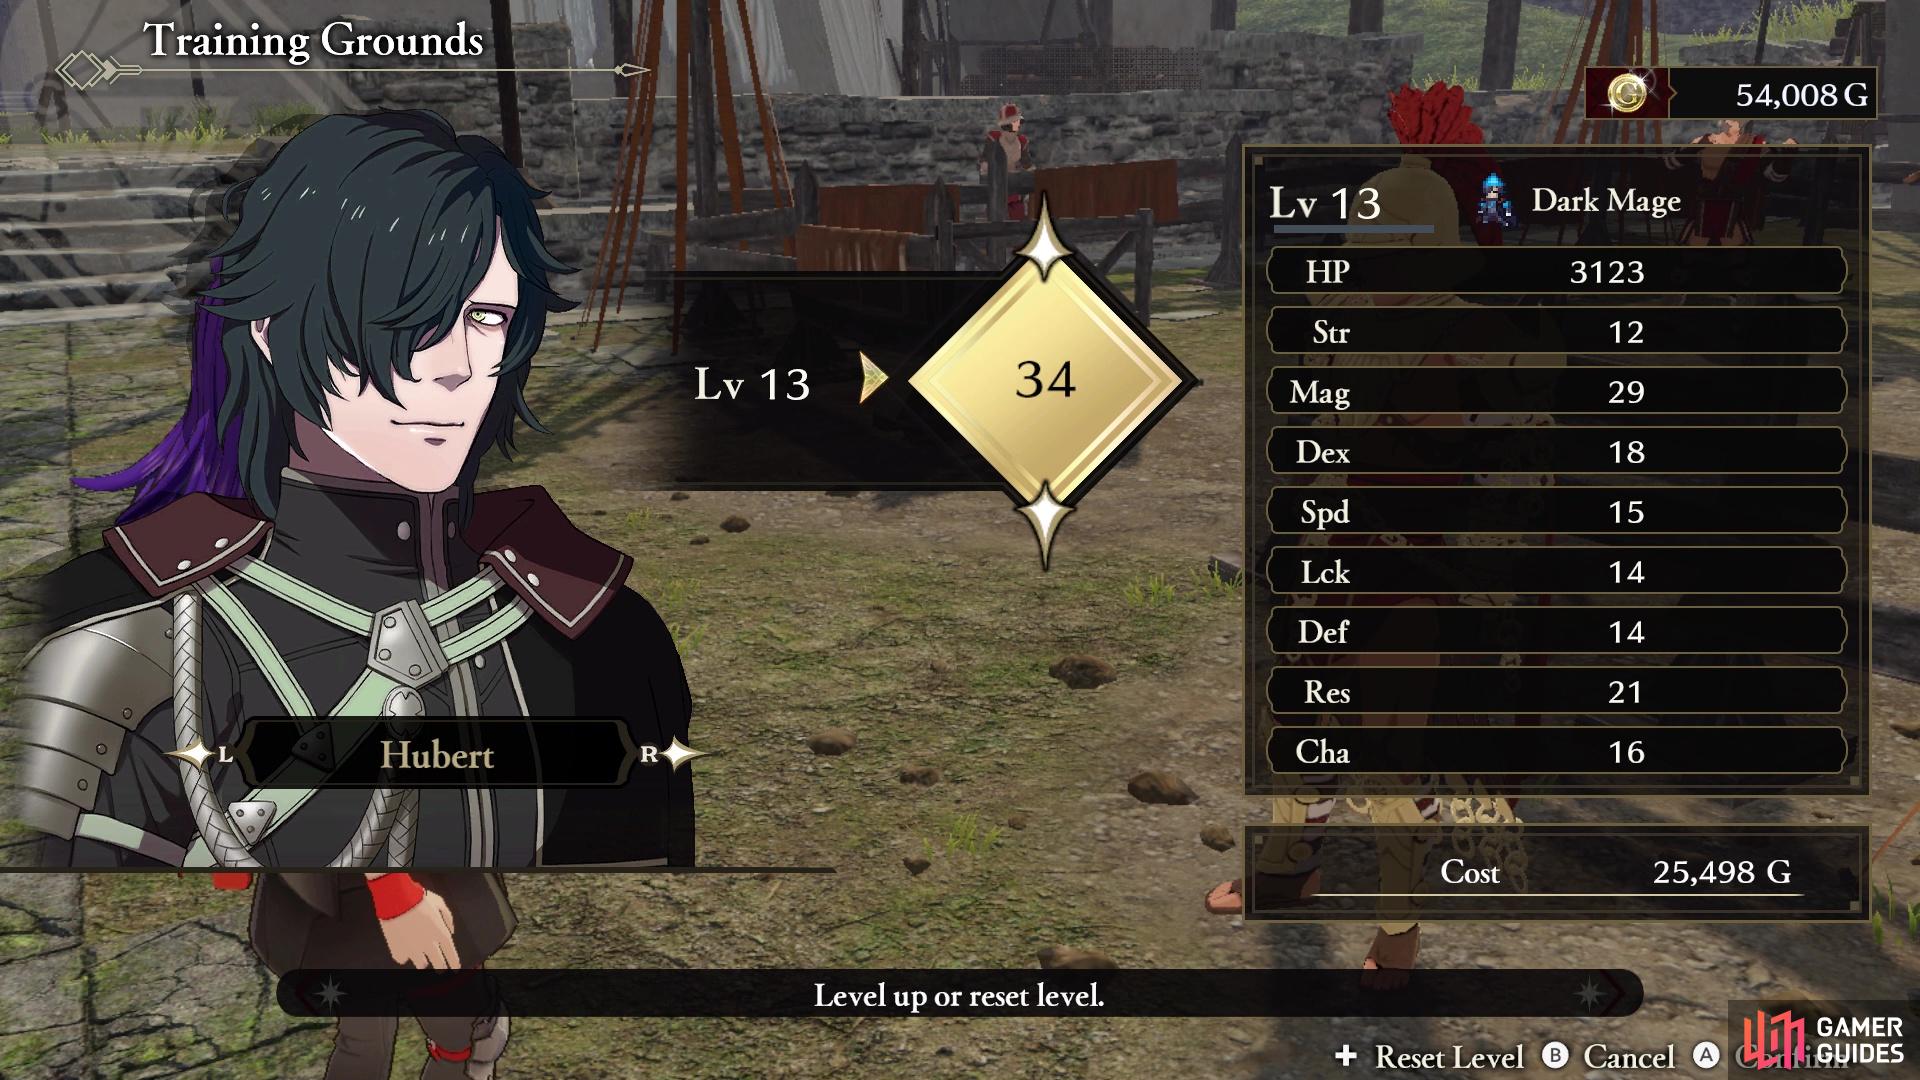 Edelgard and Hubert will be NPCs in the next battle, so make sure they are leveled and equipped